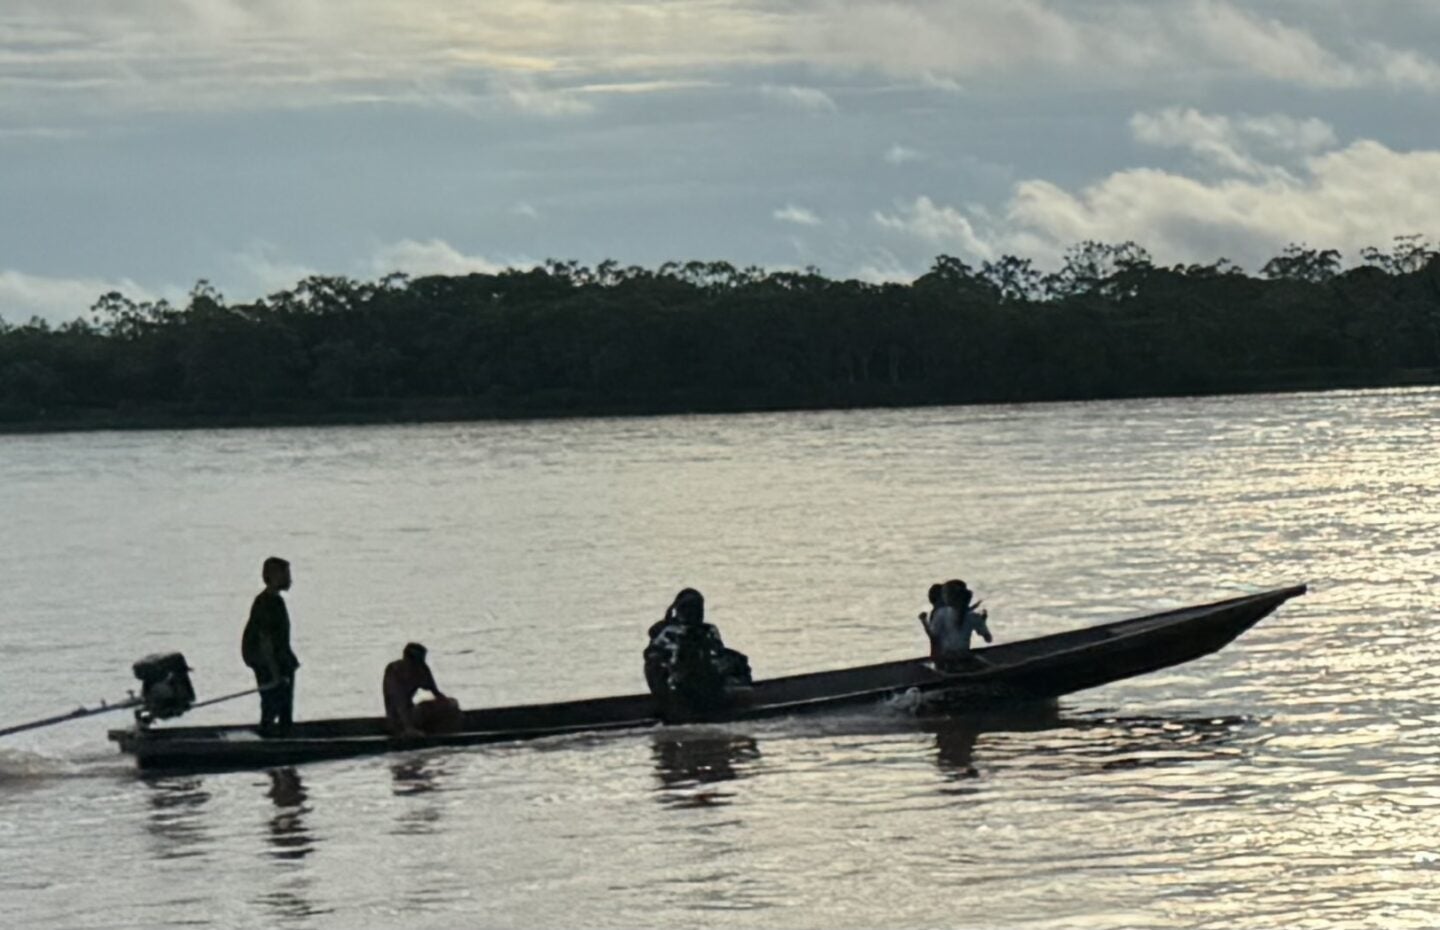 Boaters on Putamayo River, which here marks the border between Colombia and Peru (Photo Credit Masha Hamilton)